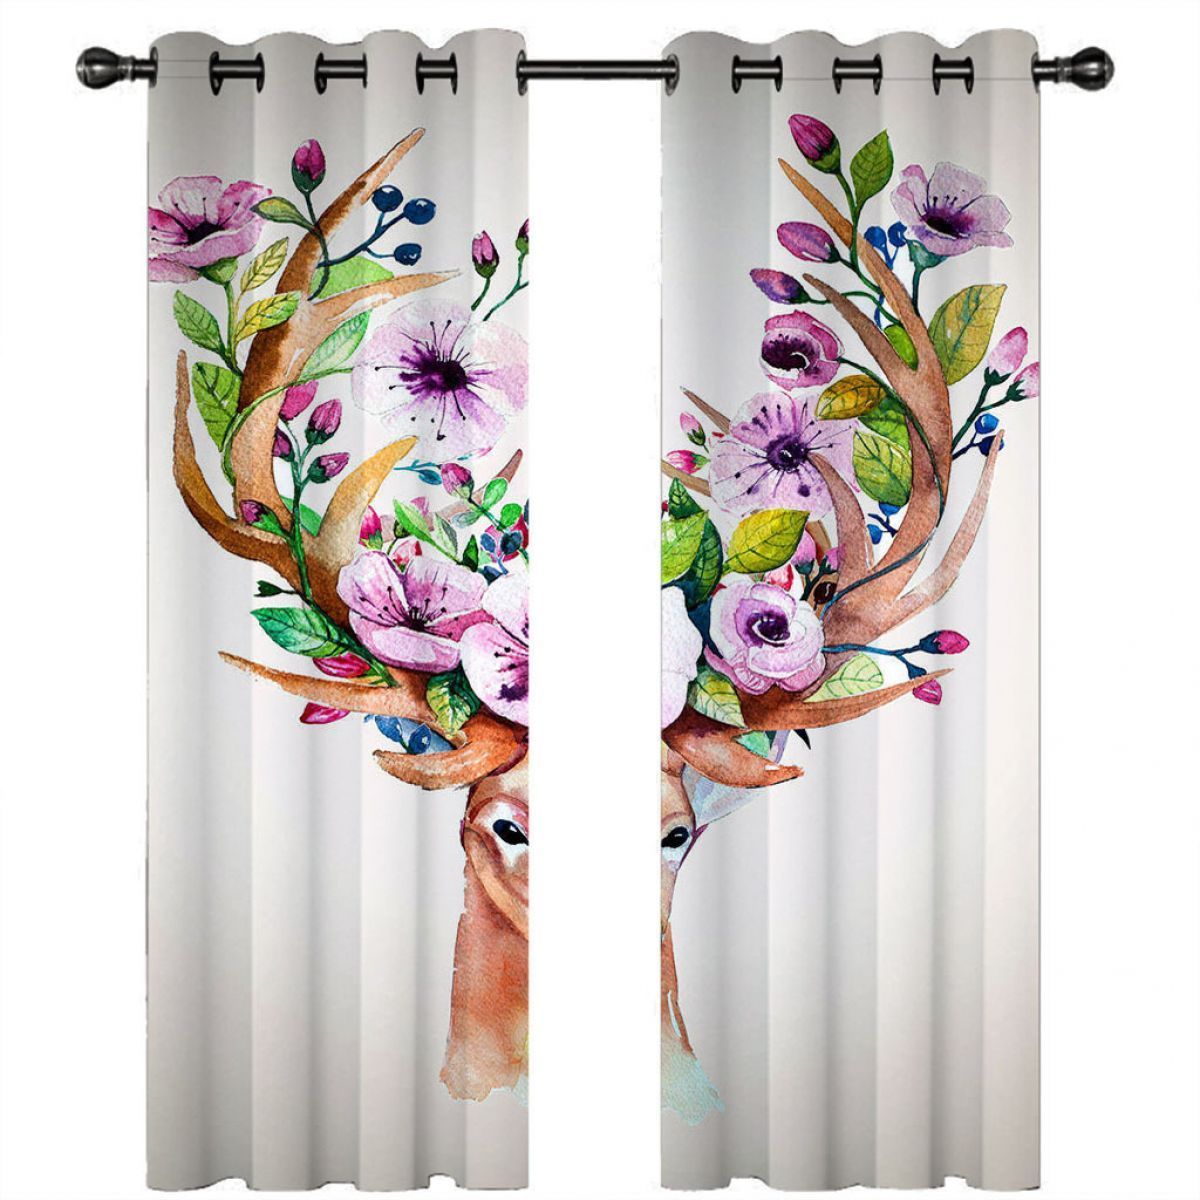 Elk And Flowers Printed Window Curtain Home Decor